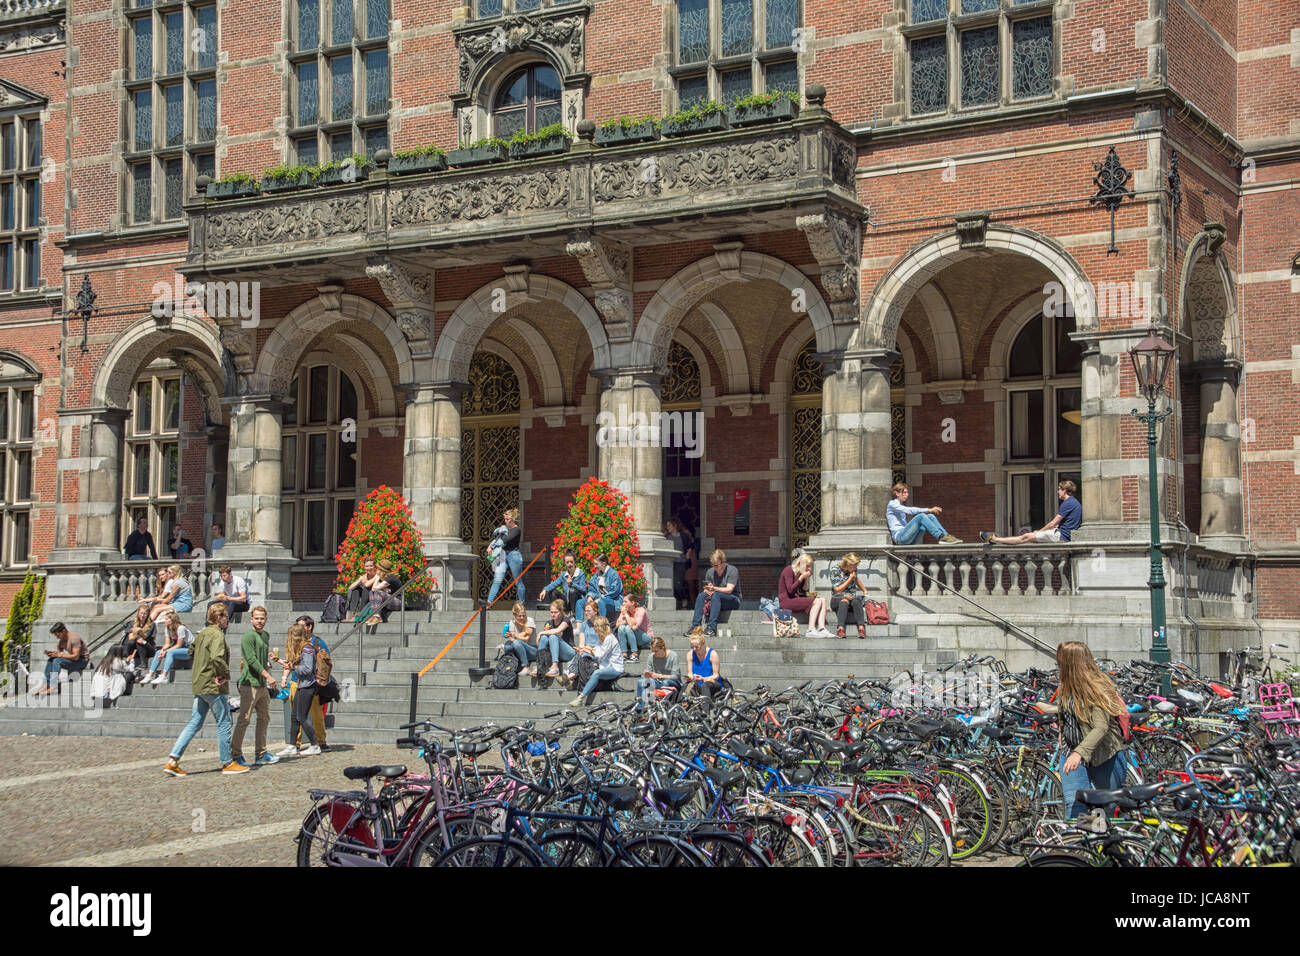 Students sitting on the steps of the main entrance of the RUG University of Groningen in the Netherlands Stock Photo